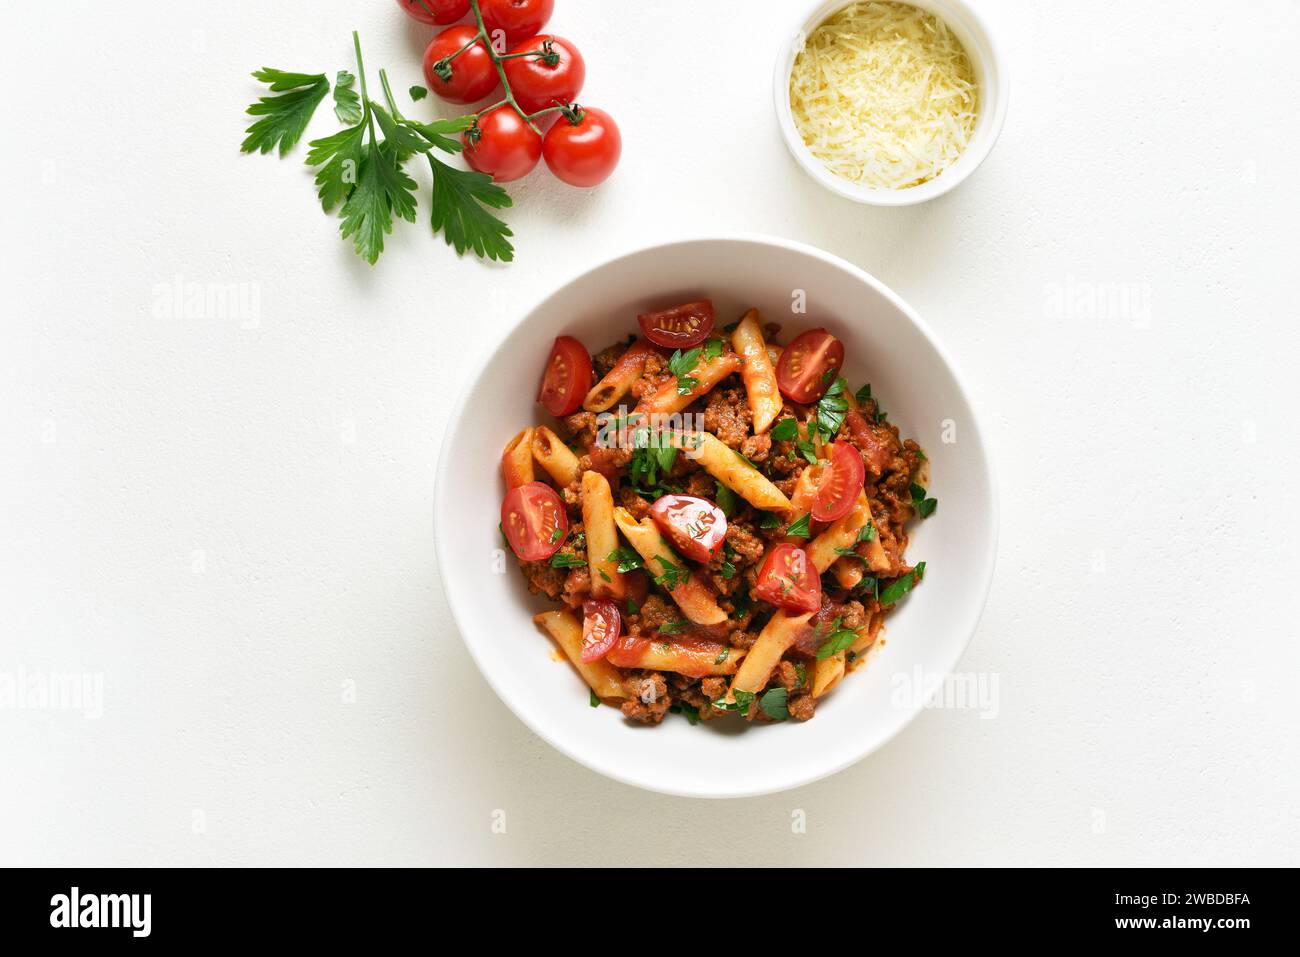 Bolognese penne pasta with minced meat, tomatoes and greens in bowl over white background with copy space. Top view, flat lay Stock Photo